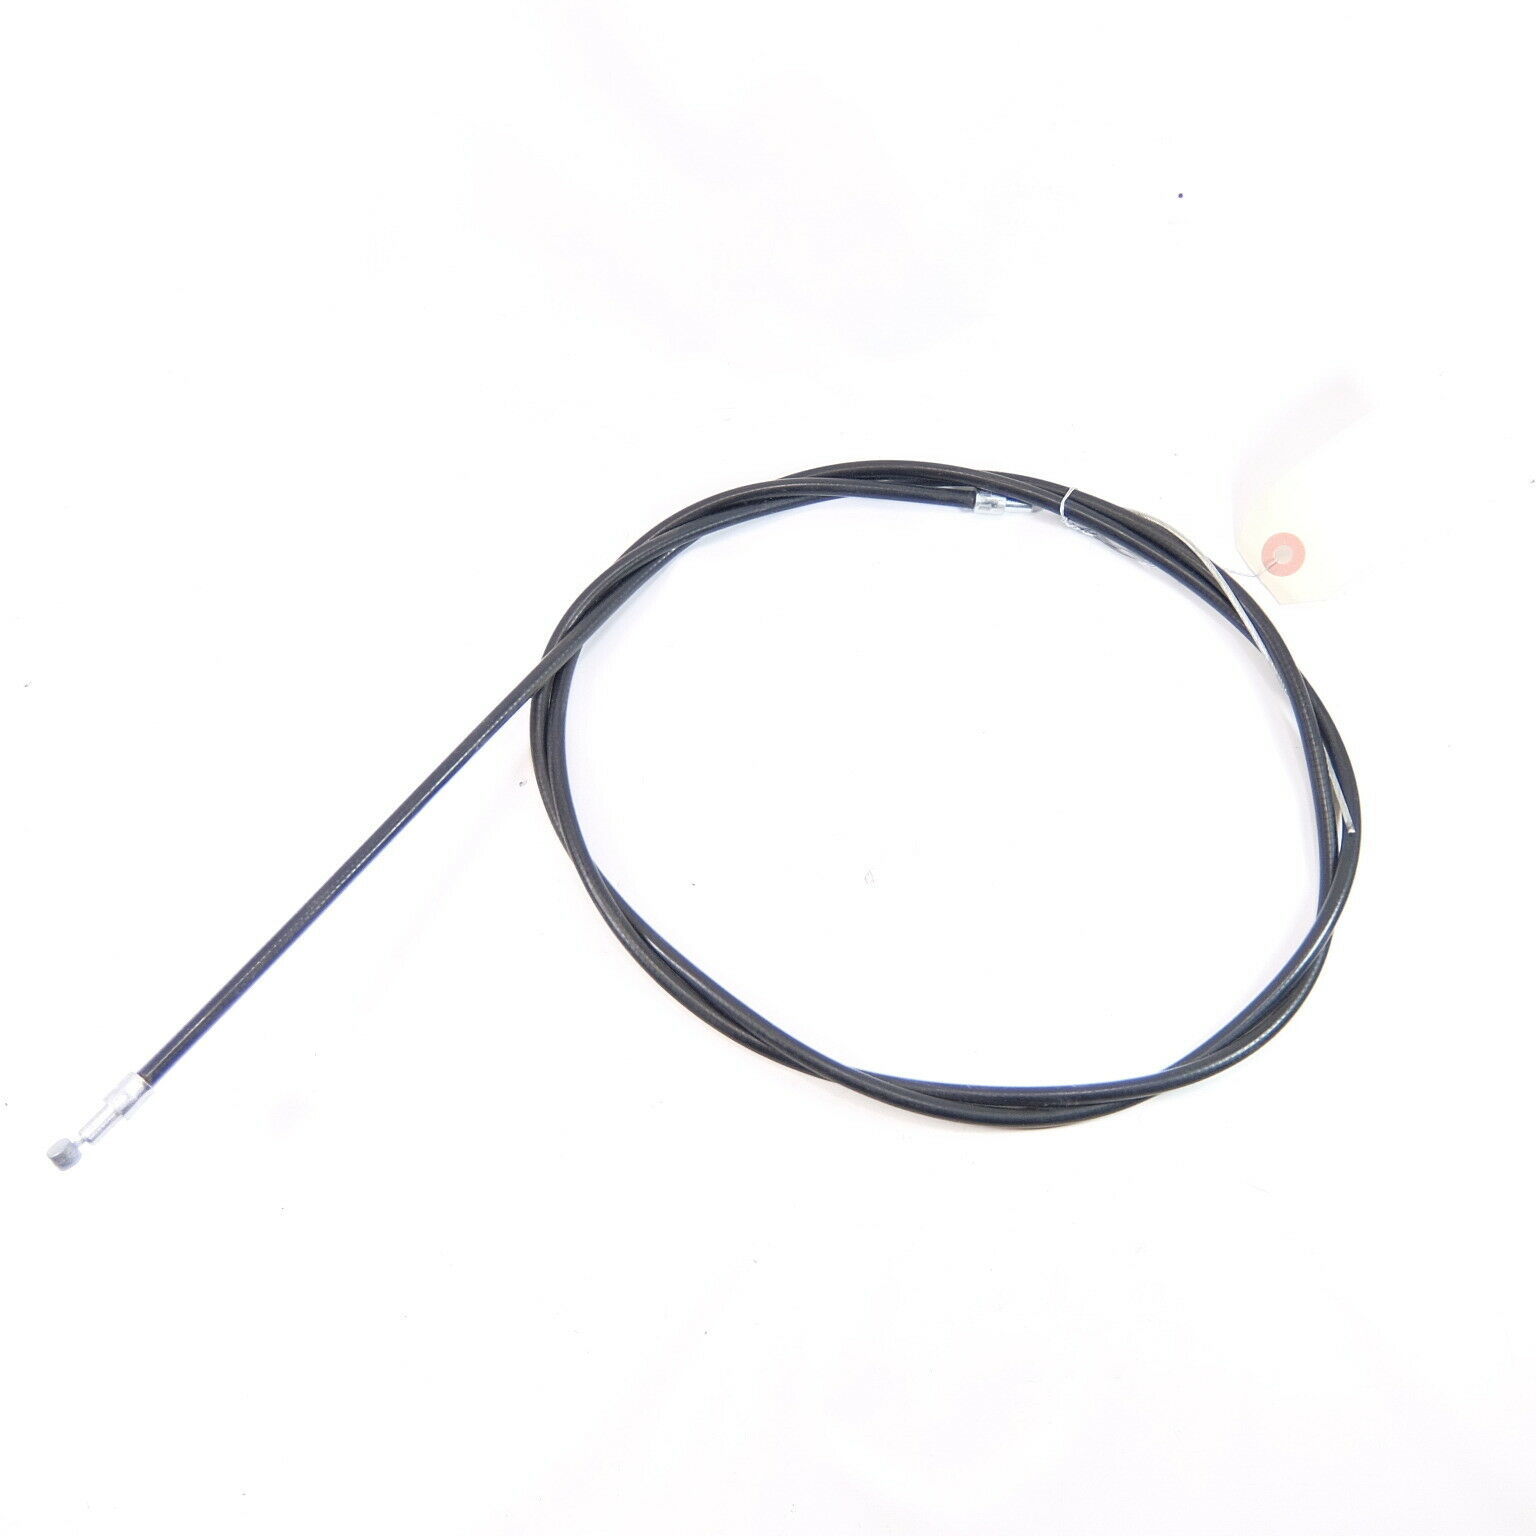 New OEM Ferris 58049501 Cable - $8.00